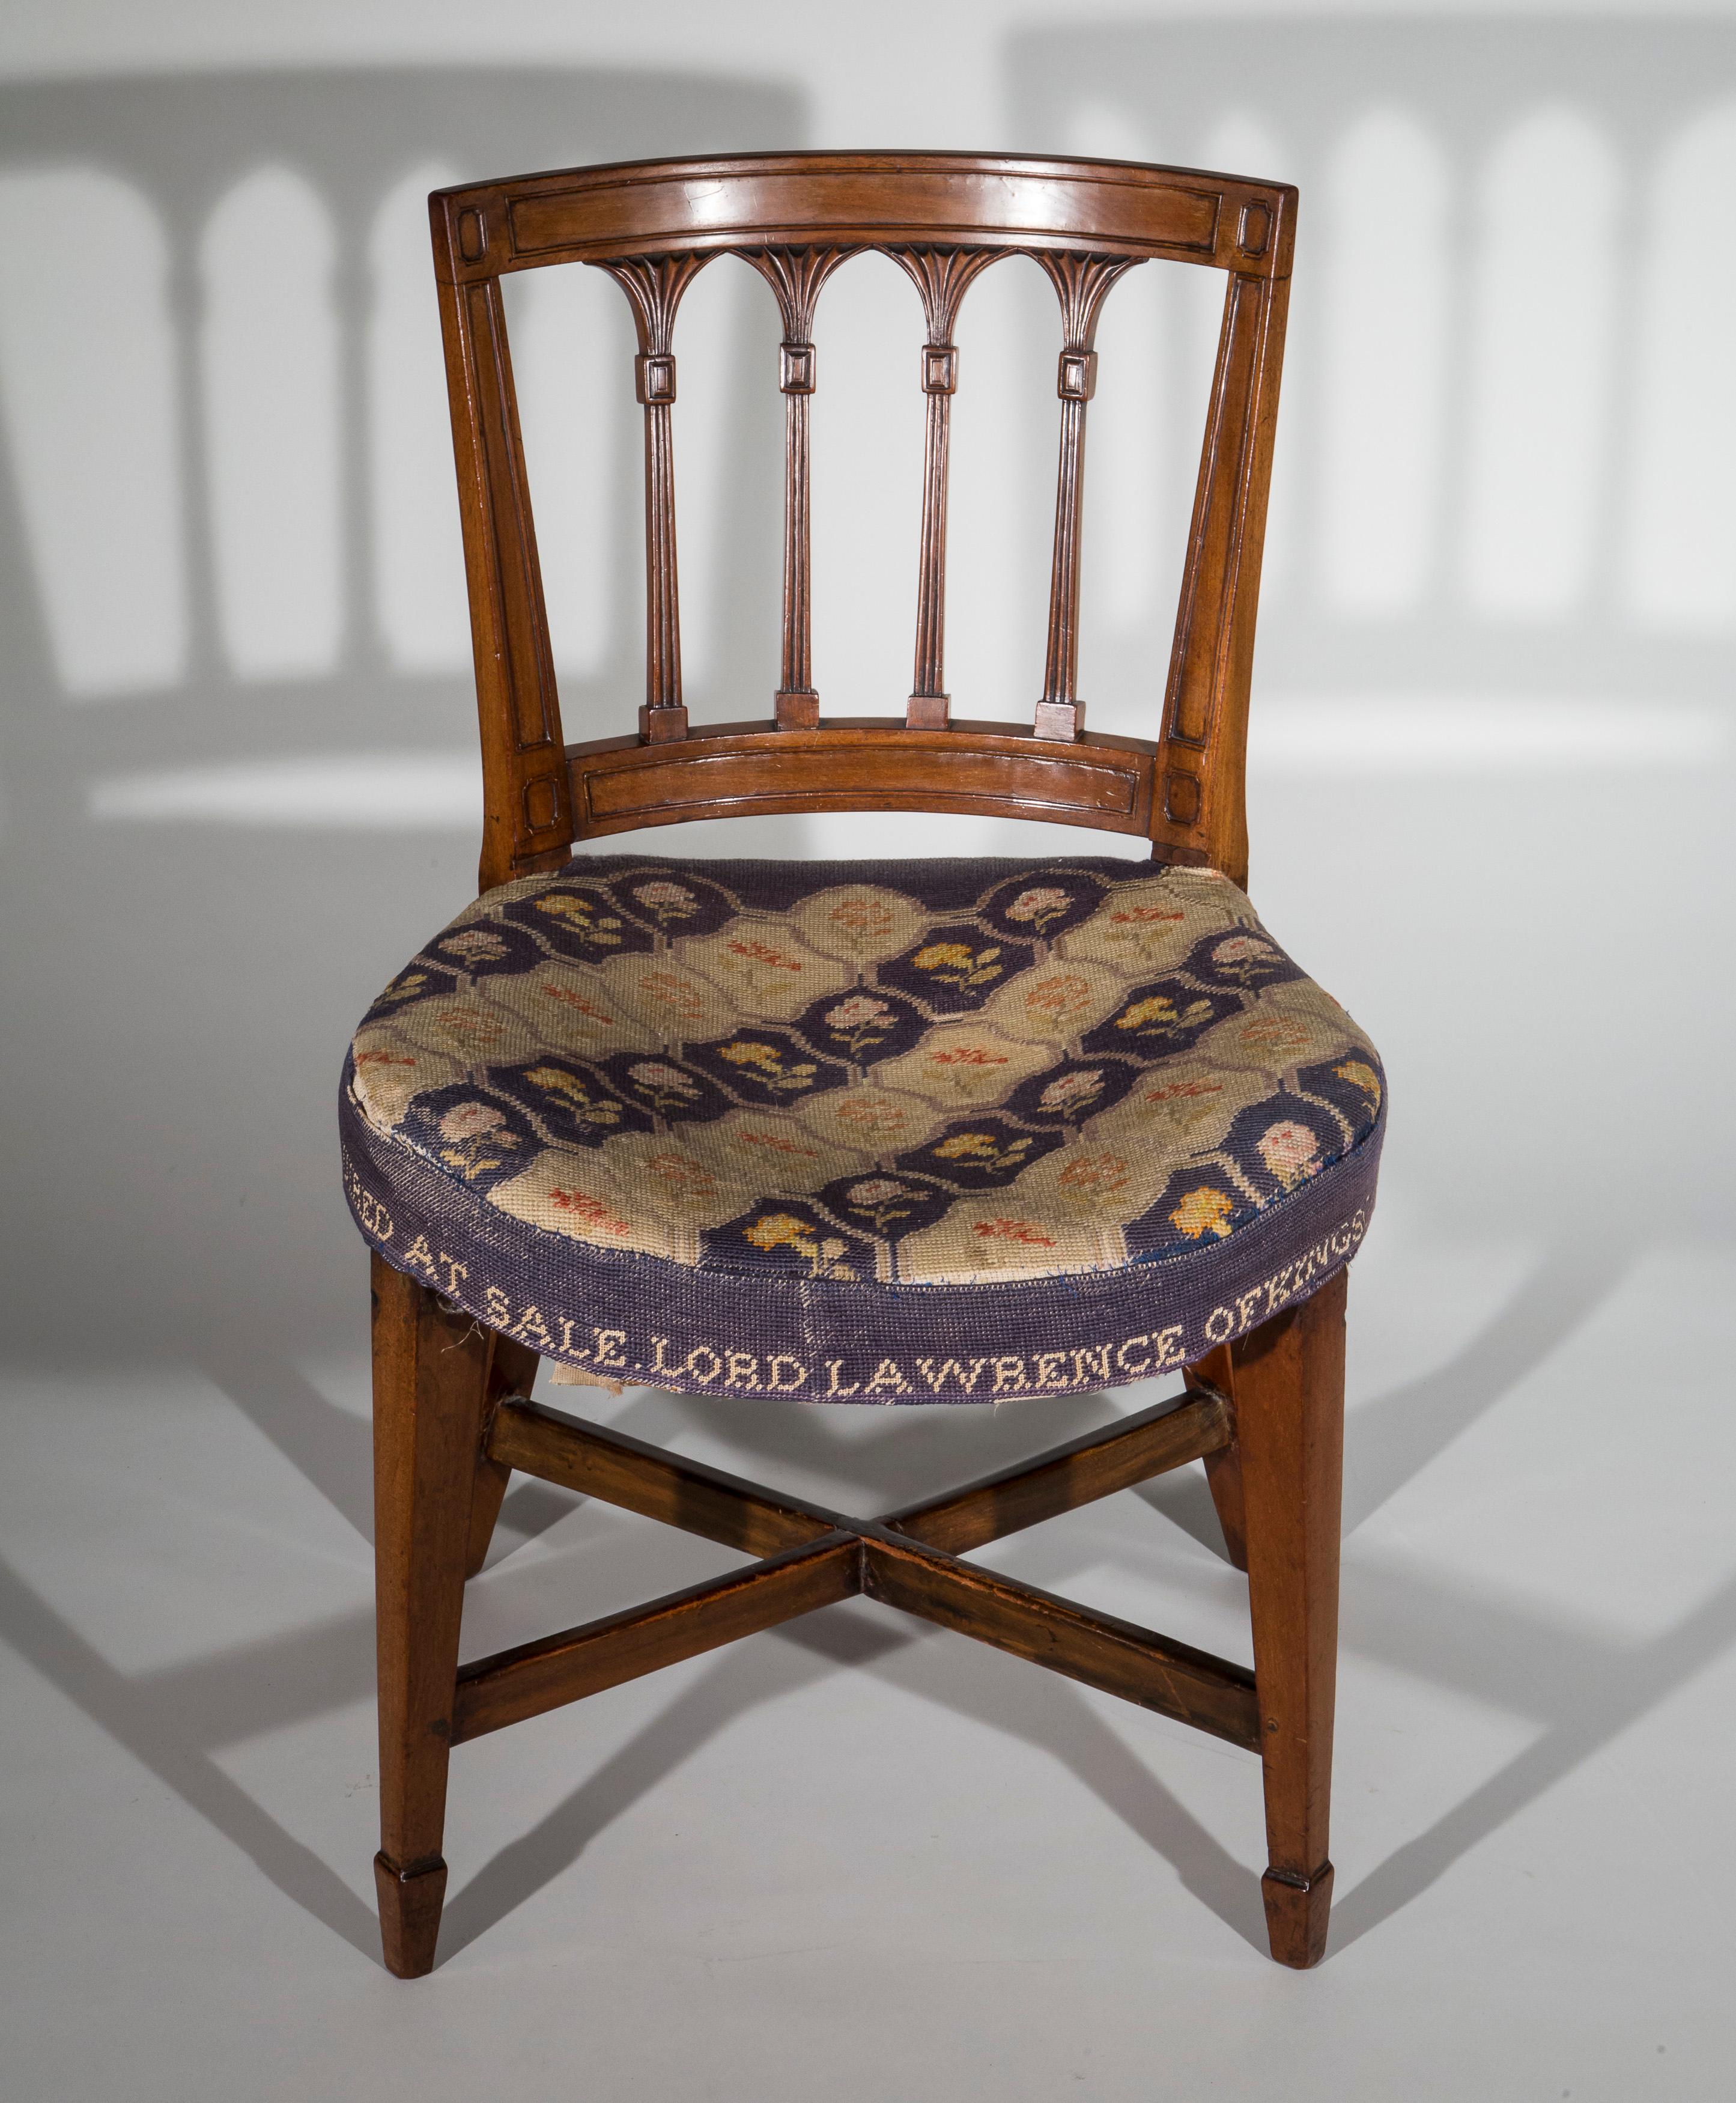 An unusual late 18th-early 19th century George III, early Regency period tub chair.

Possibly Irish, circa 1790-1800.

Why we like it

The combination of this chair's unusual design, partly following the ancient Greek 'Klismos' pattern, and its